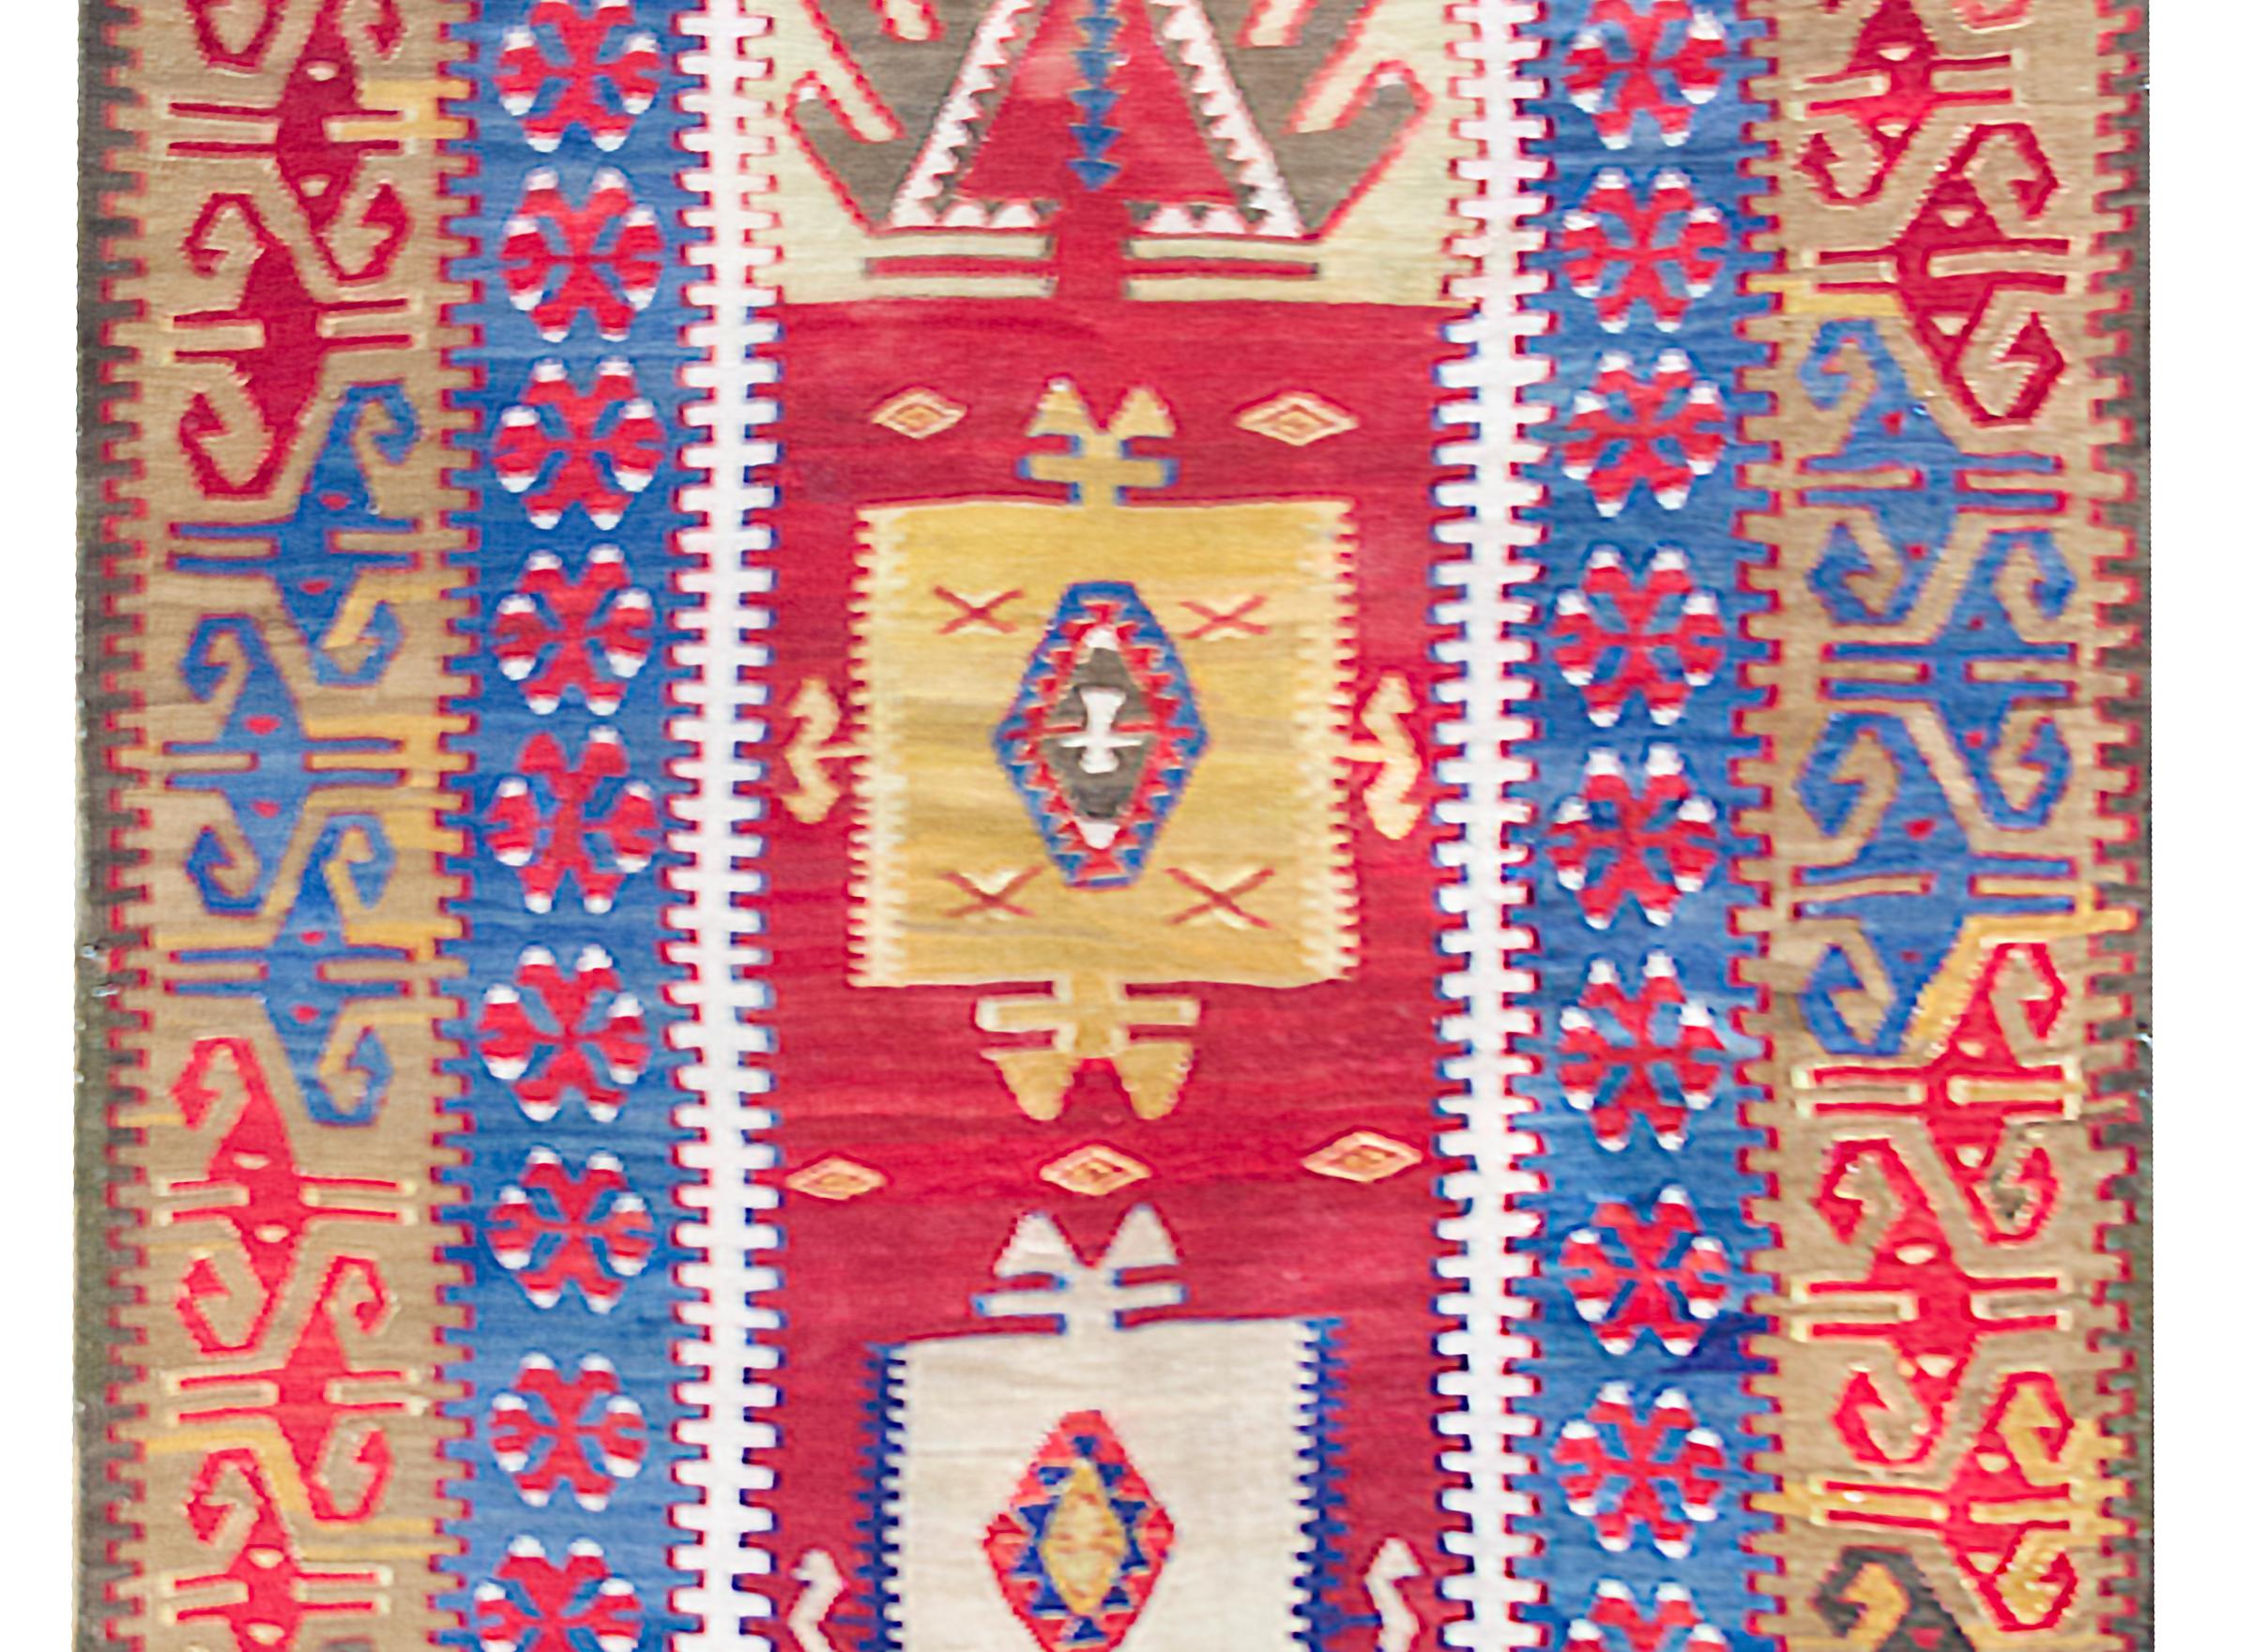 A stunning early 20th century Turkish Konya kilim rug with a fantastic bold tribal pattern containing two large stylized floral medallions amidst a field of more stylized flowers, surrounded by a complex stylized floral border, and all woven in